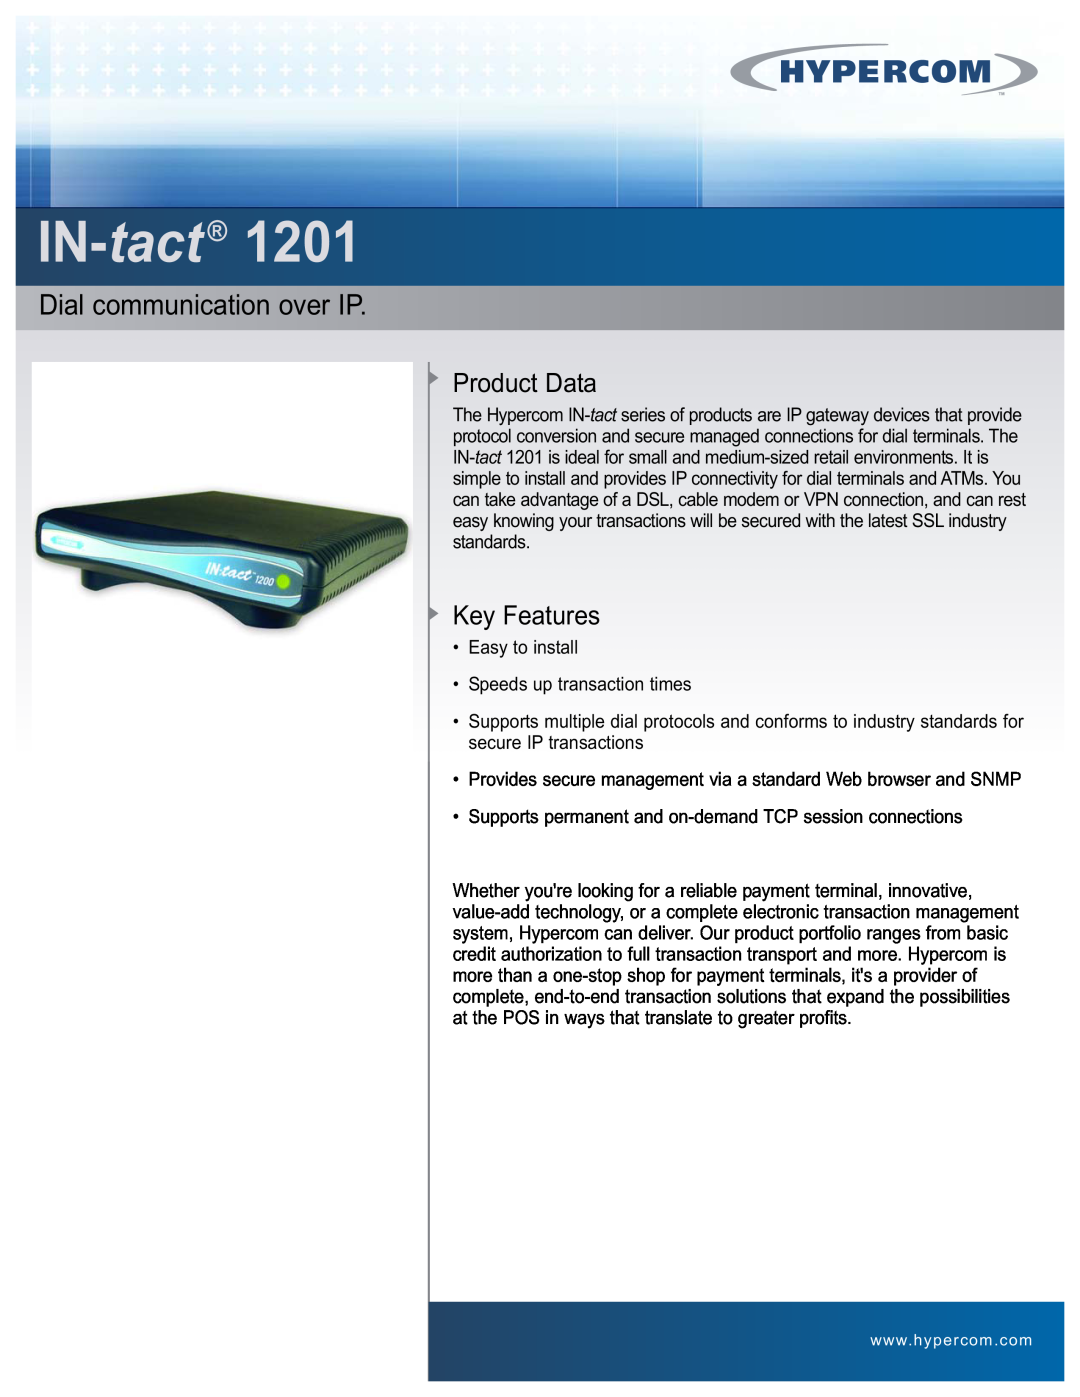 Hypercom manual IN-tact1201, Product Data, Key Features, Dial communication over IP, standards 